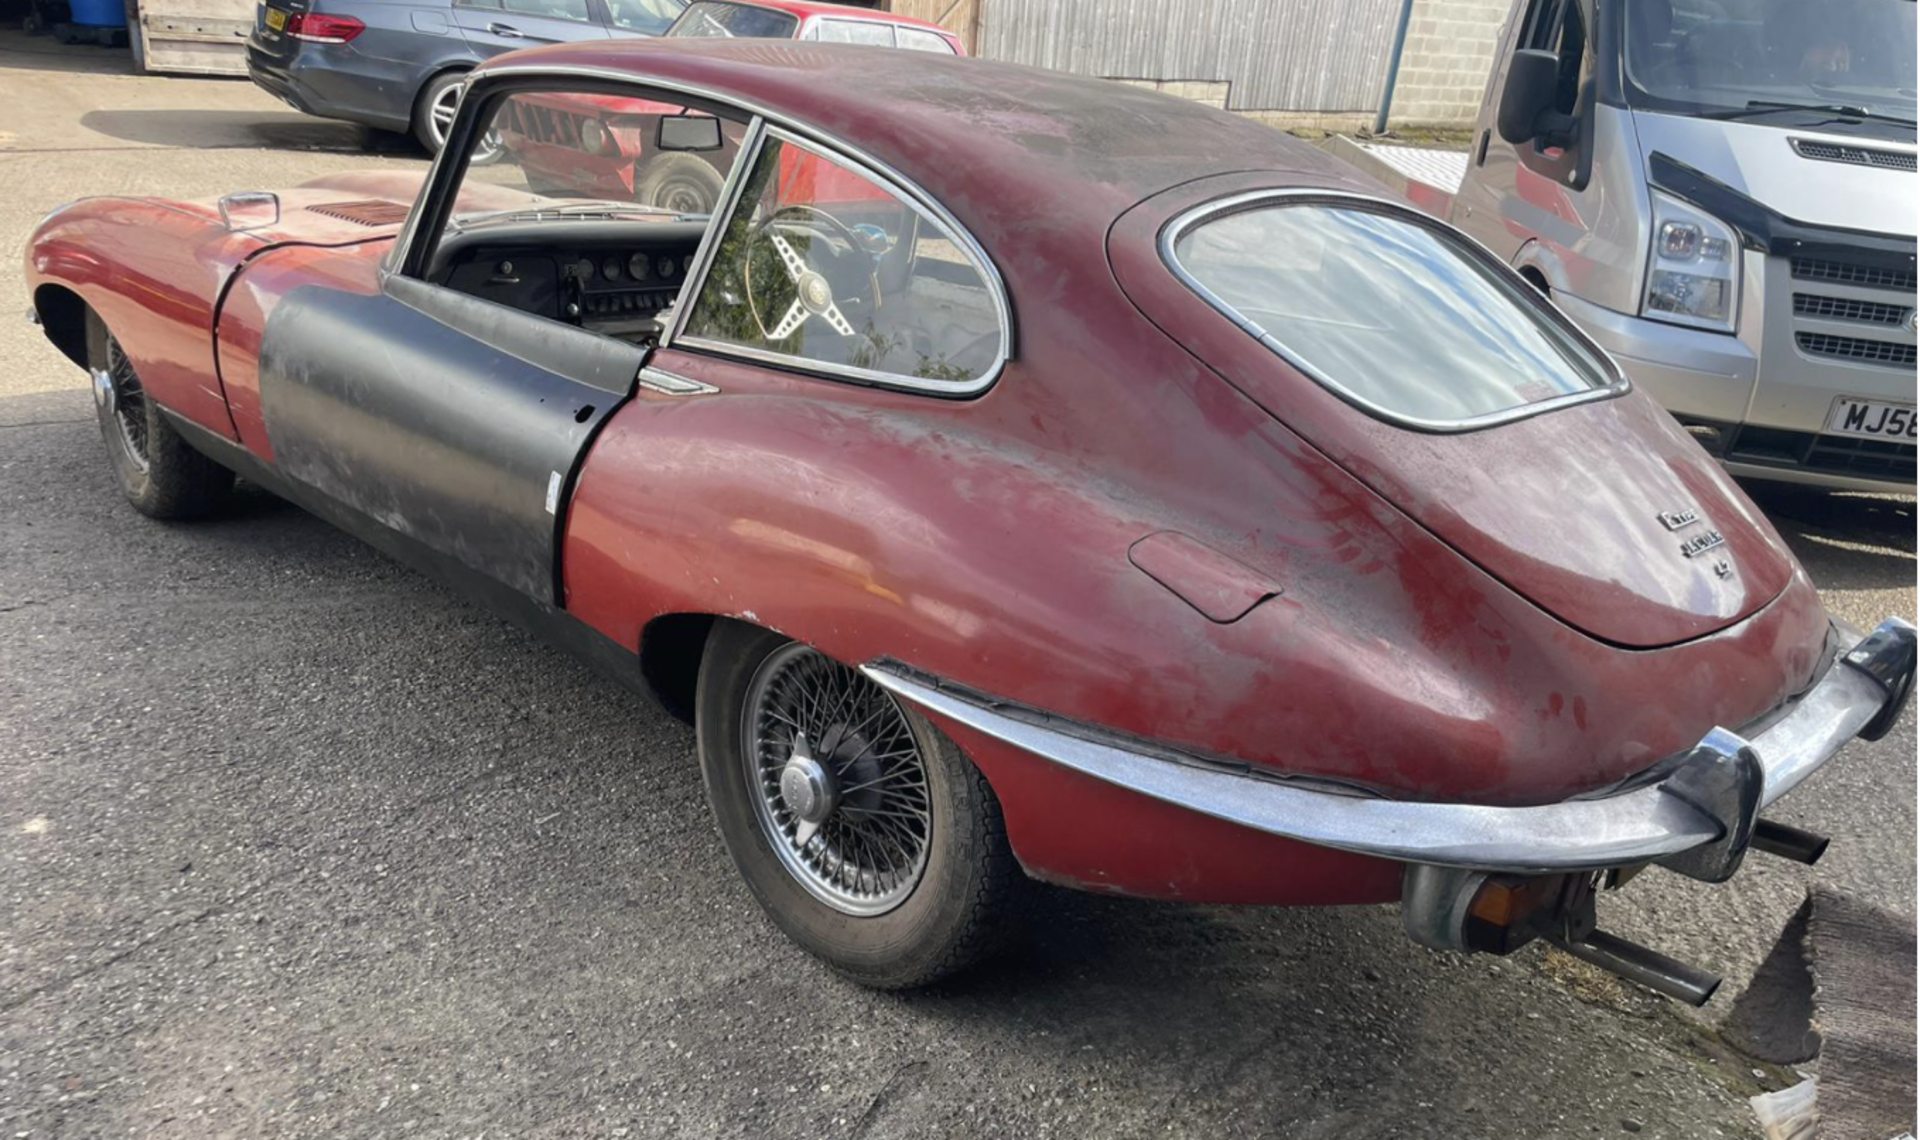 Jaguar E-Type barn find - starts runs and drives - Image 6 of 17